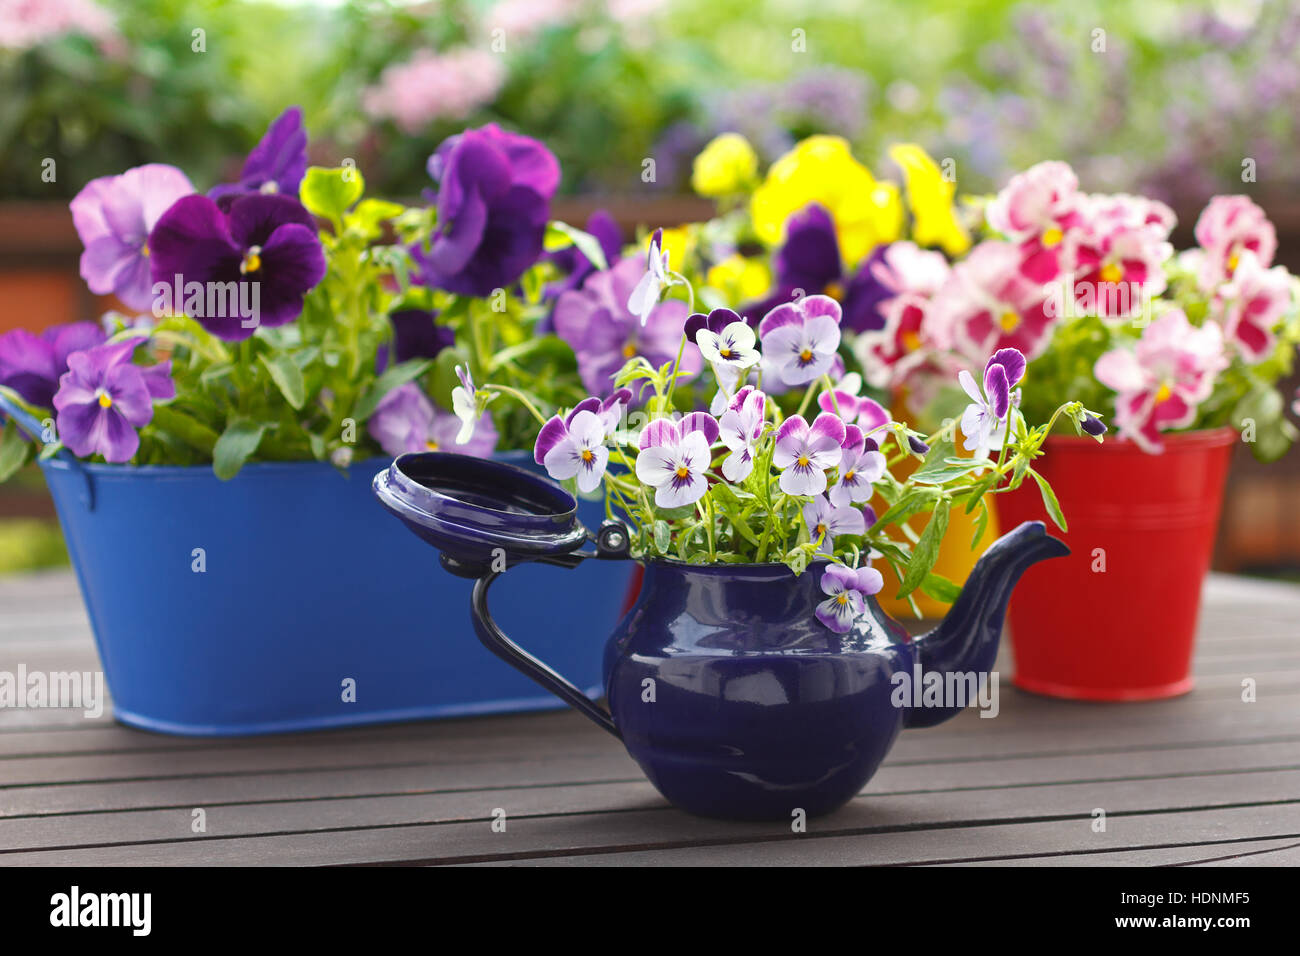 Purple, red and yellow pansy flowers in colorful pots and an old enamel jug on a balcony table, copy space, background Stock Photo